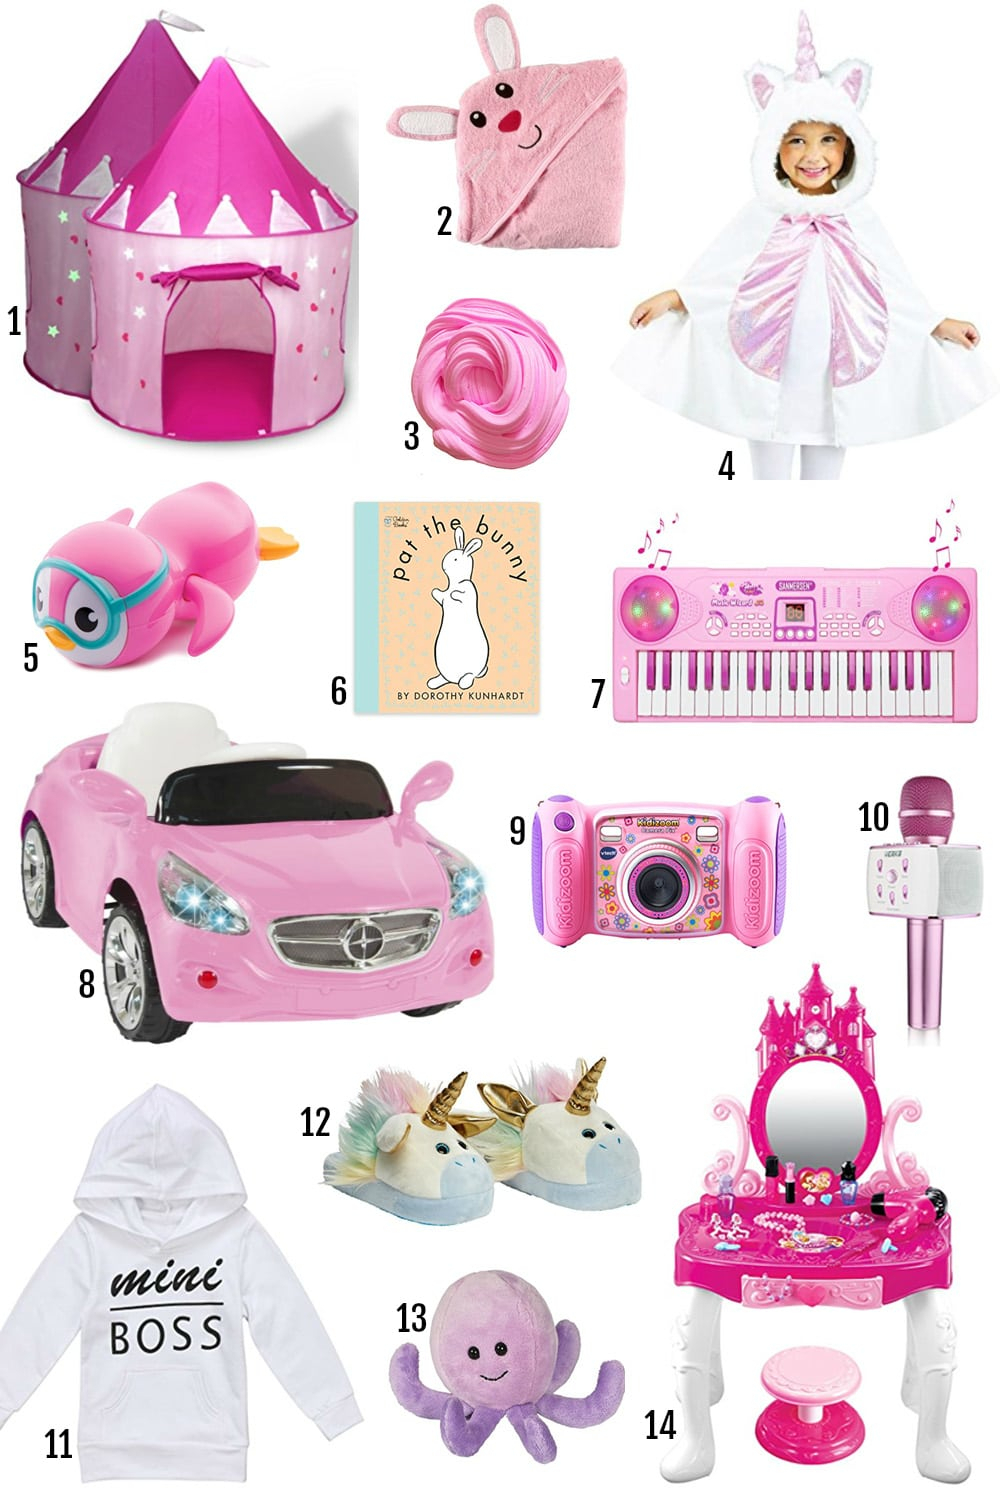 10 Cute Toddler Gift Ideas For Girls last minute gifts for everyone on your list mash elle 2022